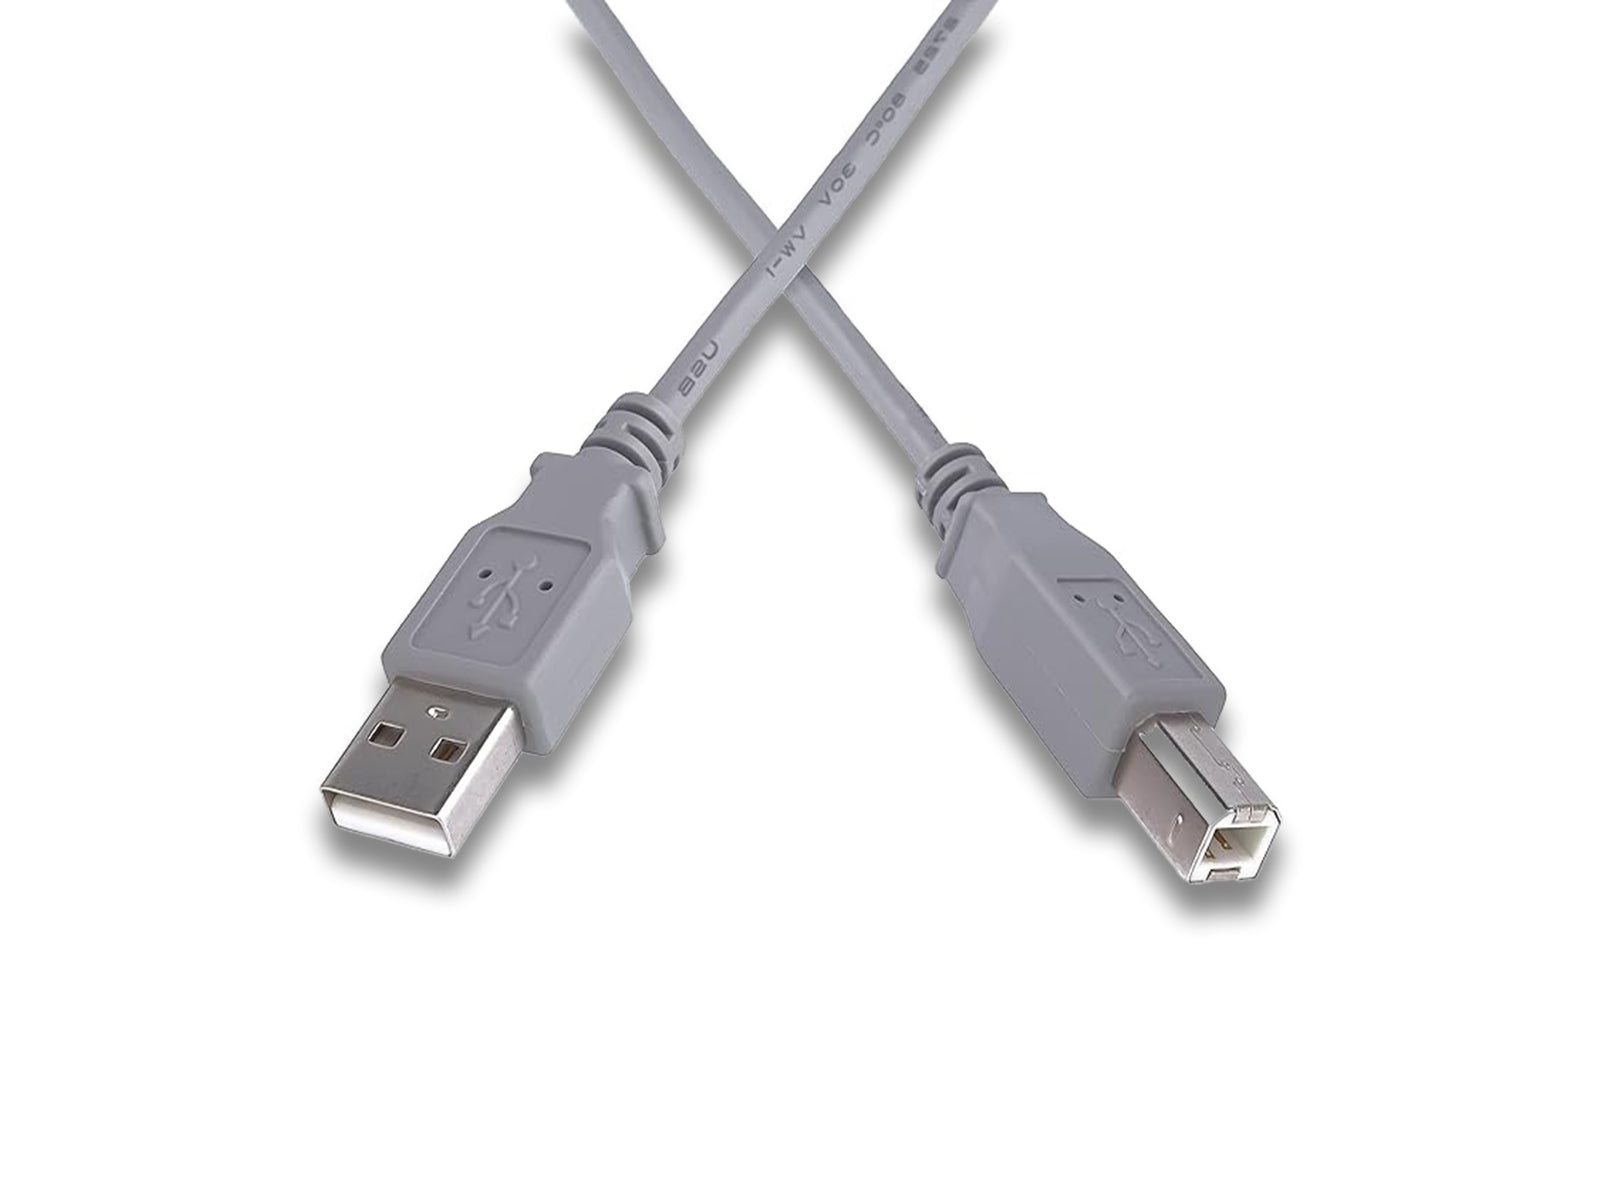 Printer Cable with USB Type A & Male USB Type B Showing Durability 